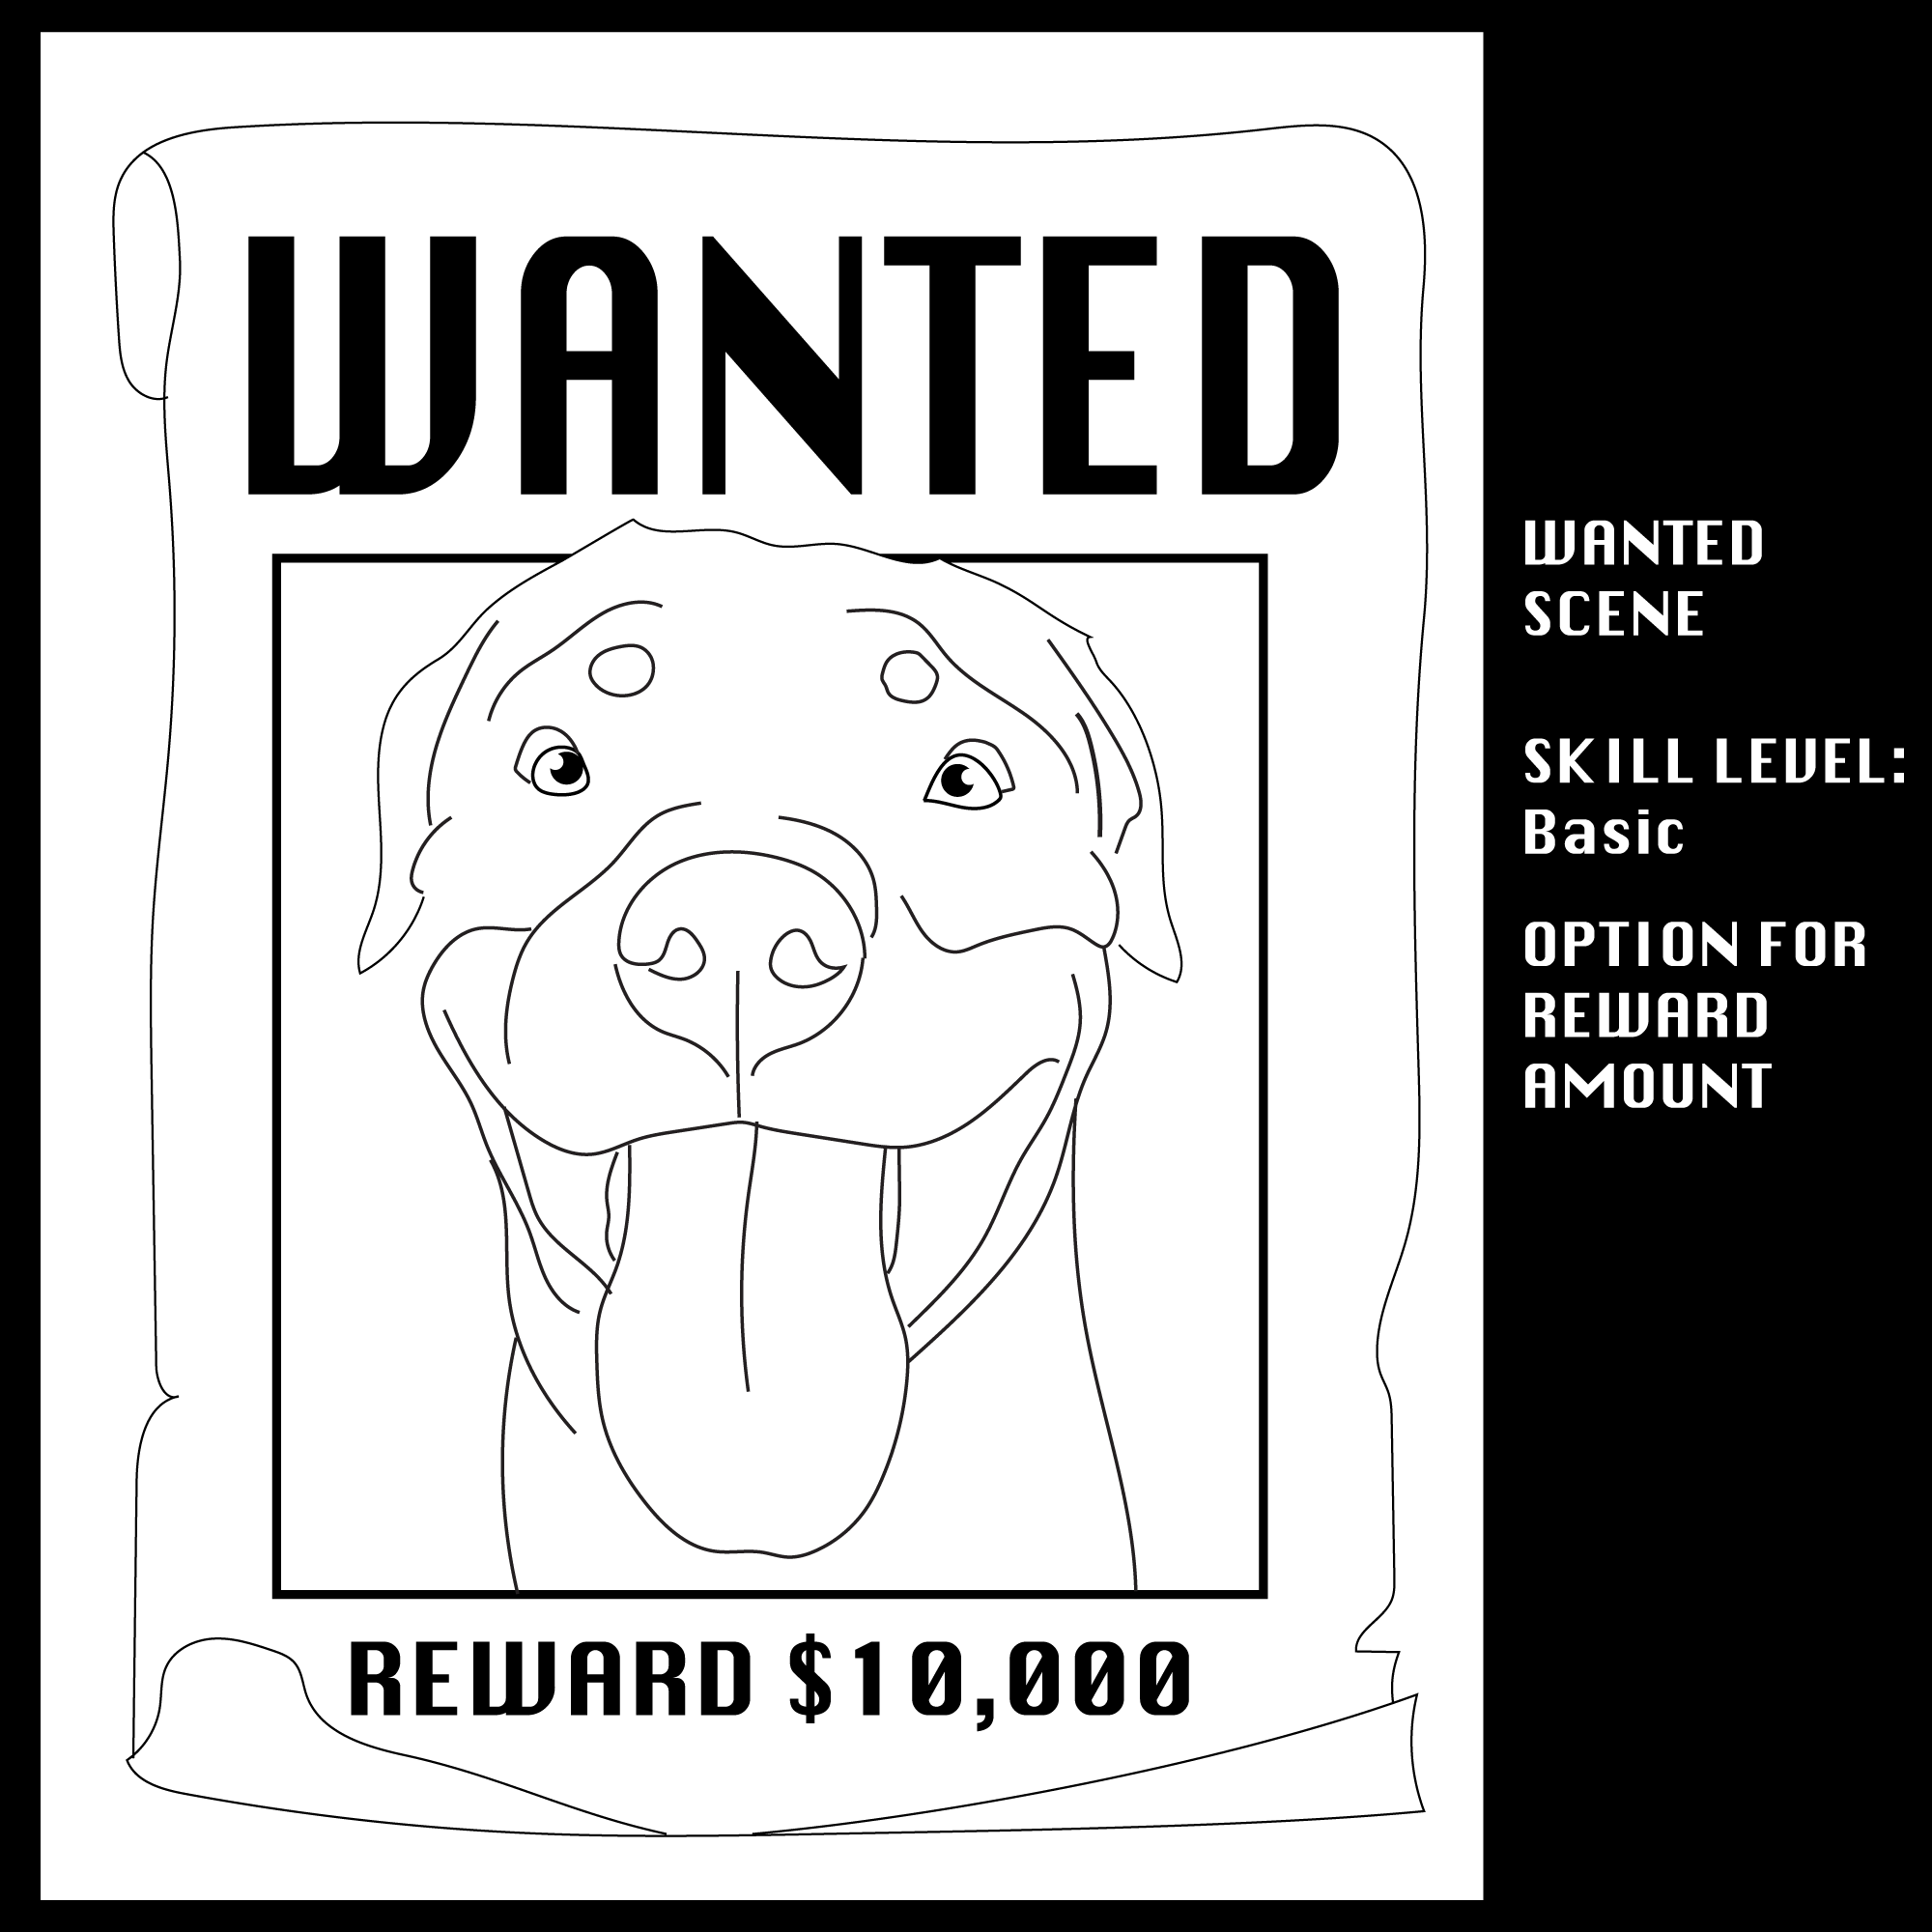 CRIME_wanted2.png